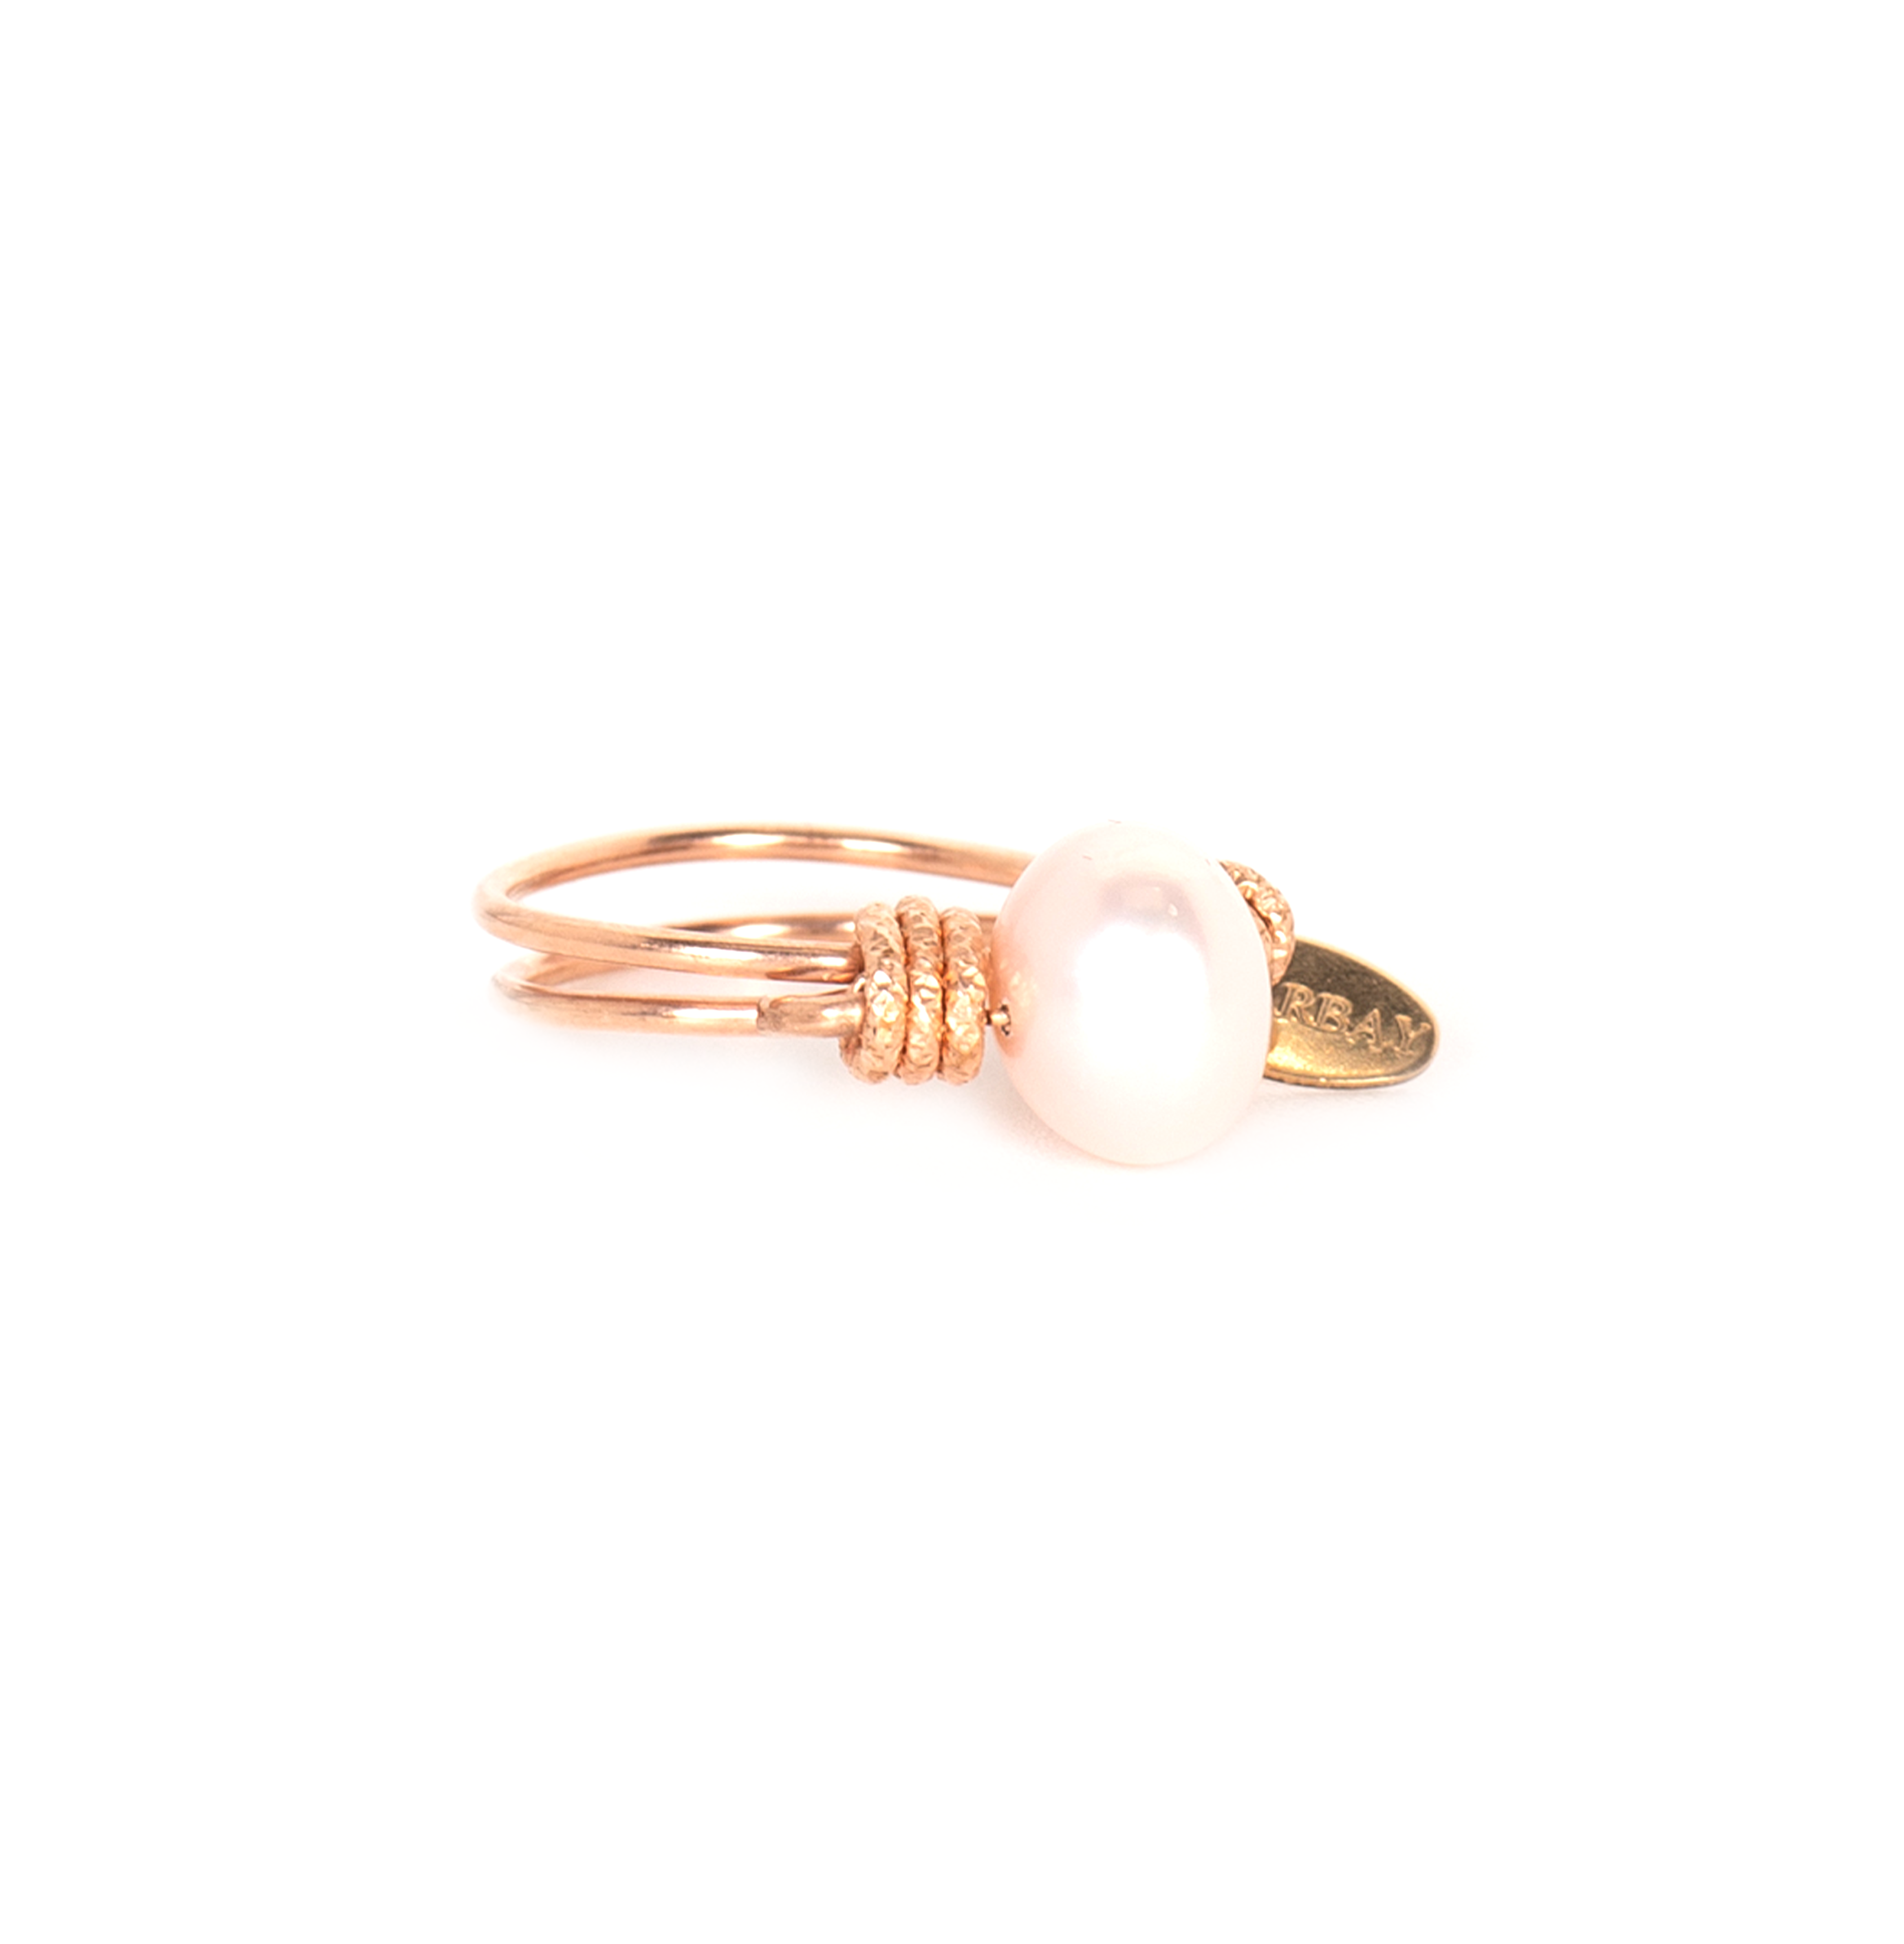 Solitaire Ring #1 (10mm) - Salmon Pearl & Rose Gold Rings TARBAY   